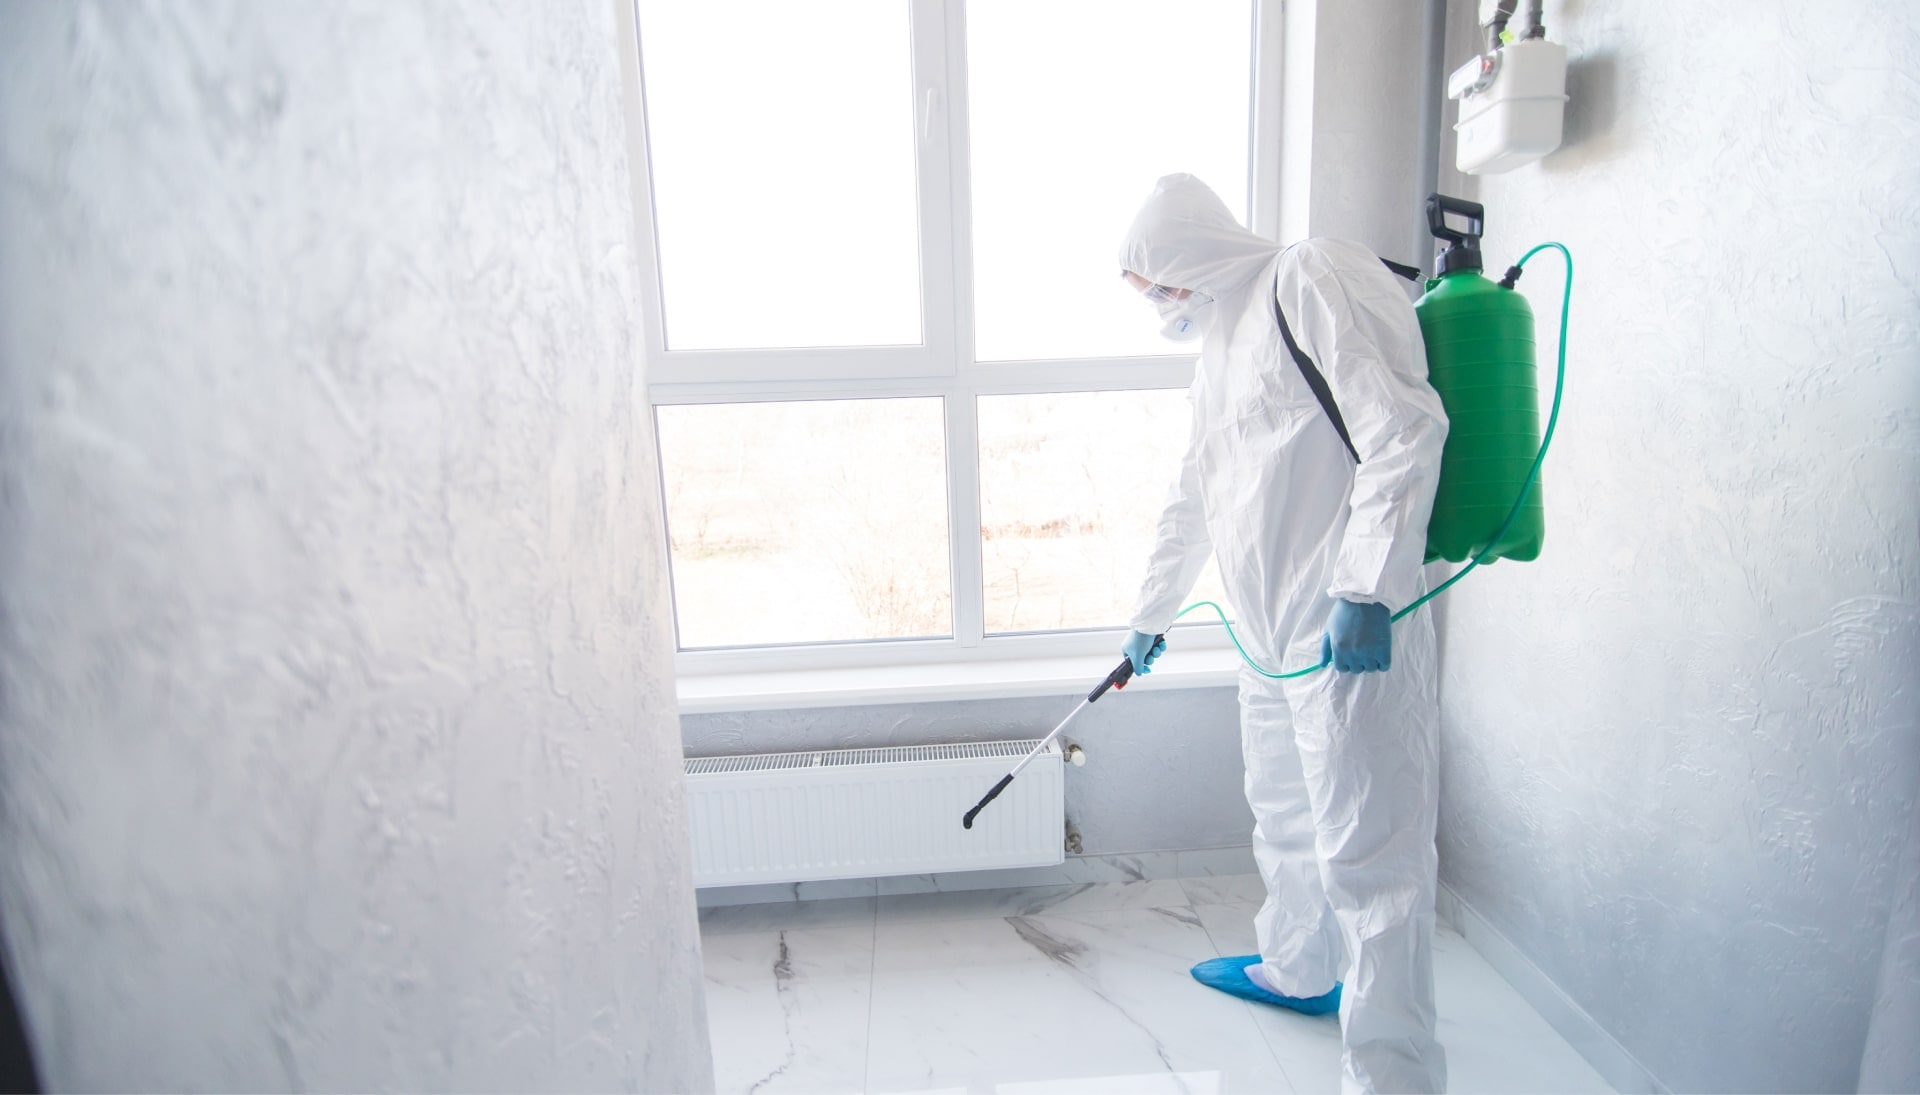 We provide the highest-quality mold inspection, testing, and removal services in the Towson, Maryland area.